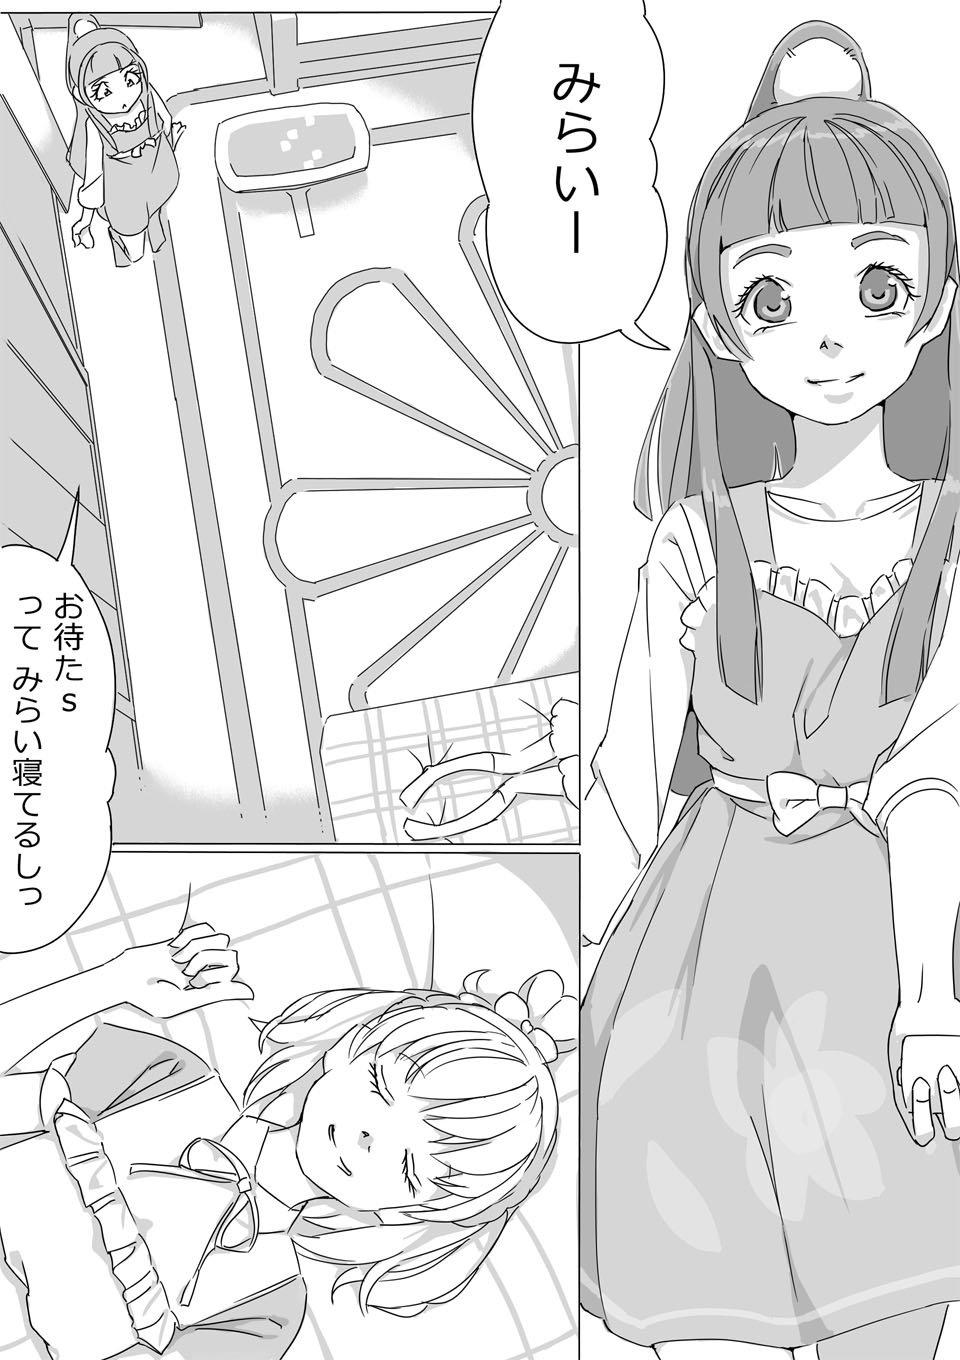 Softcore Untitled Precure Doujinshi - Maho girls precure Cum Swallow - Page 1